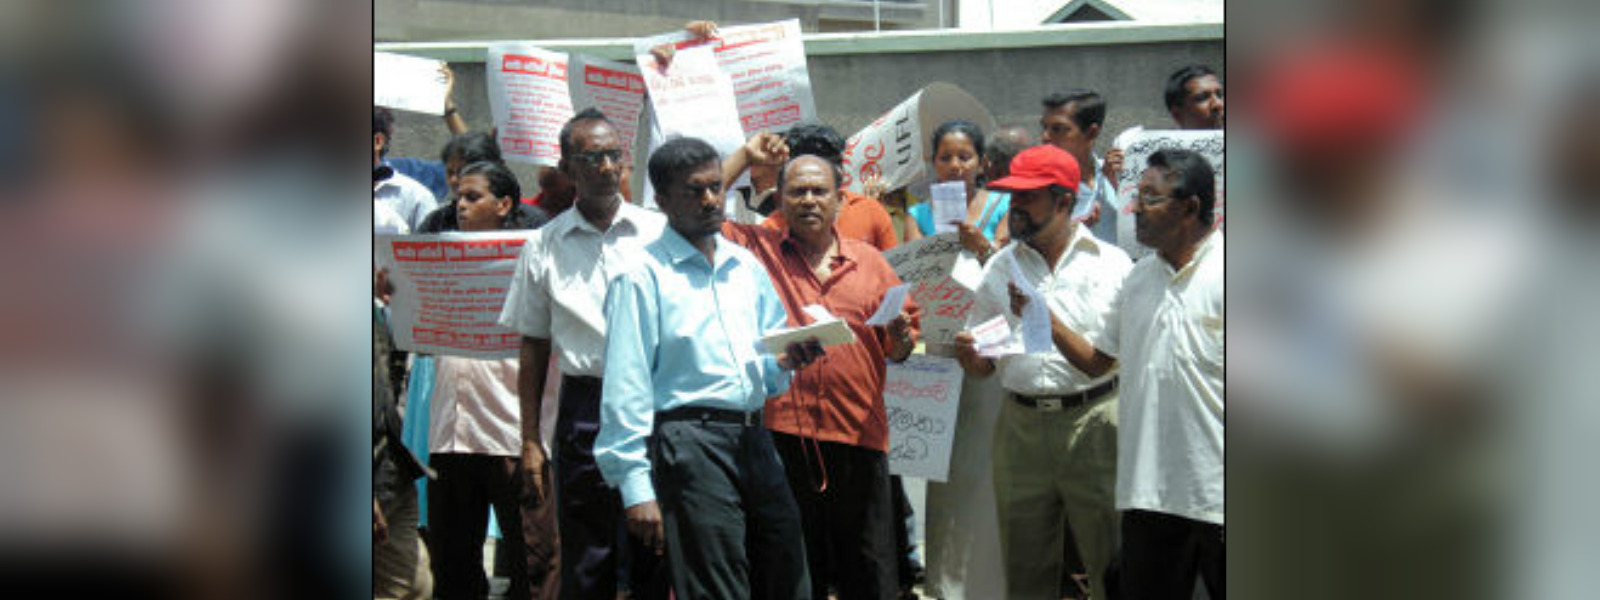 Paramedical and Supplementary service officials in Southern province on strike